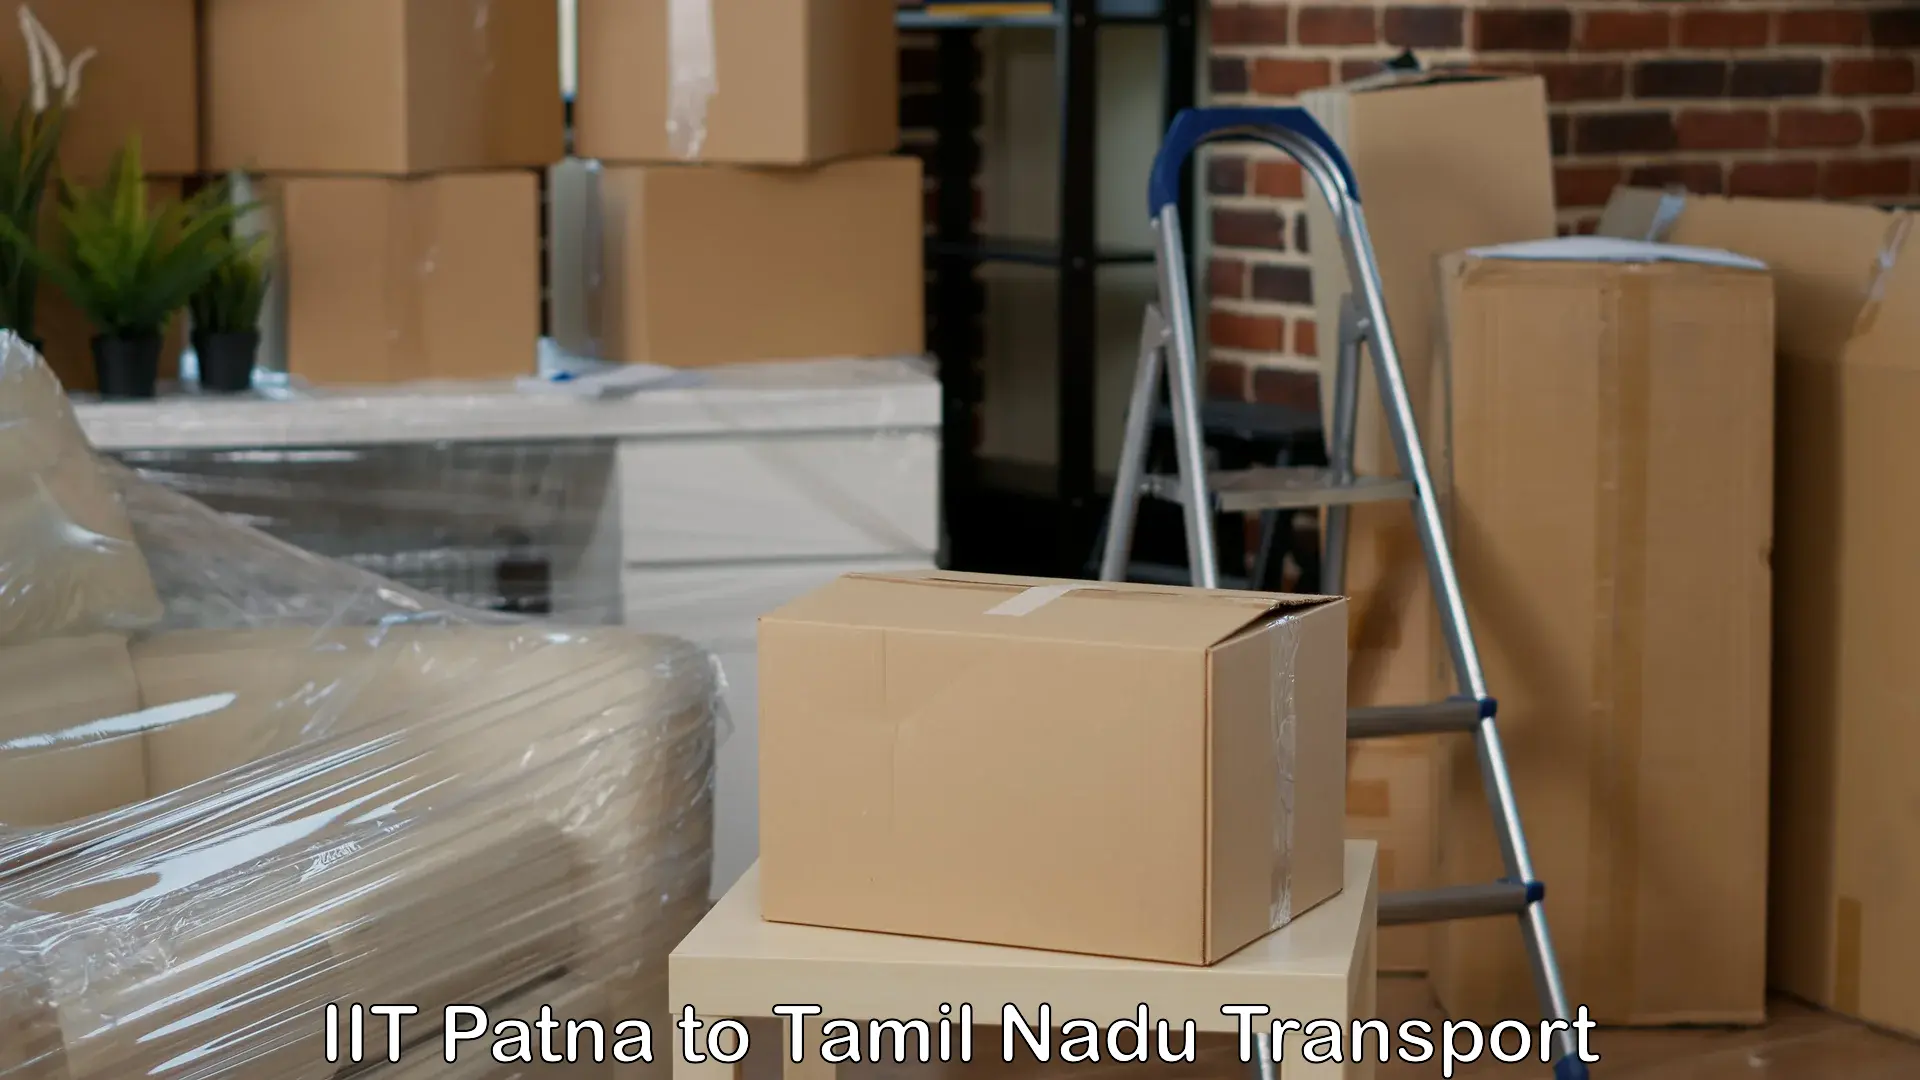 Shipping services IIT Patna to Trichy